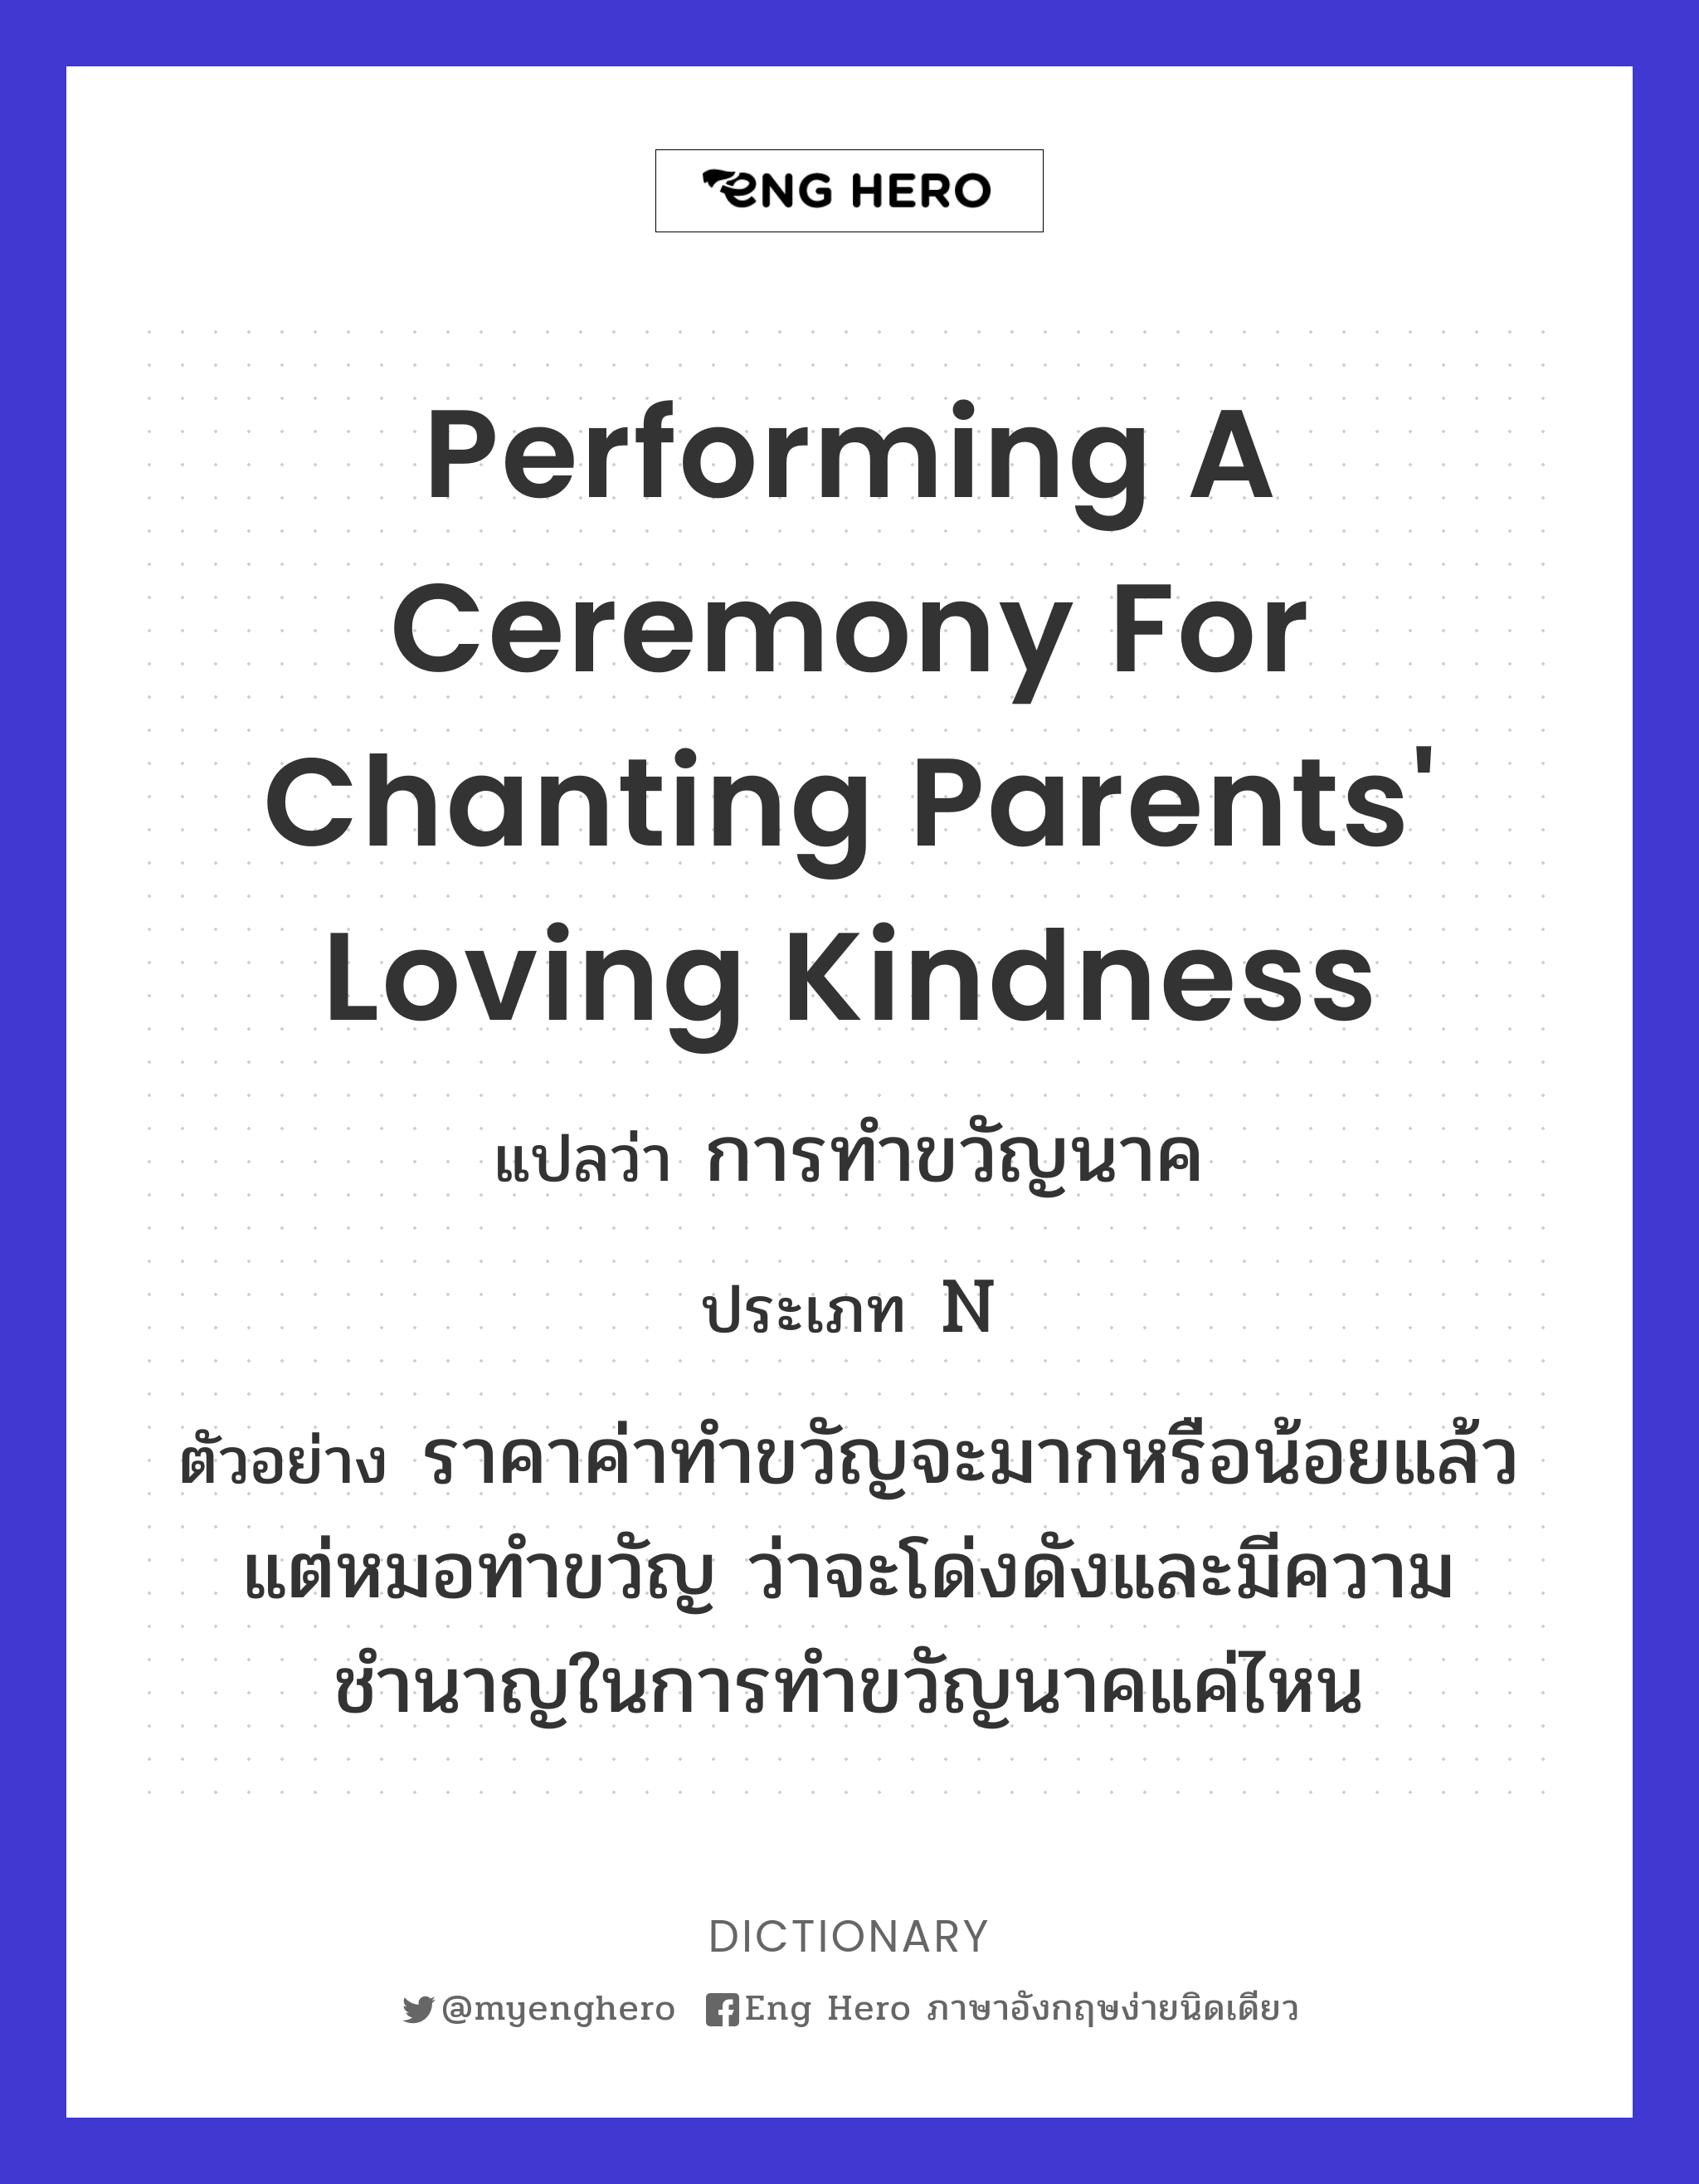 performing a ceremony for chanting parents' loving kindness